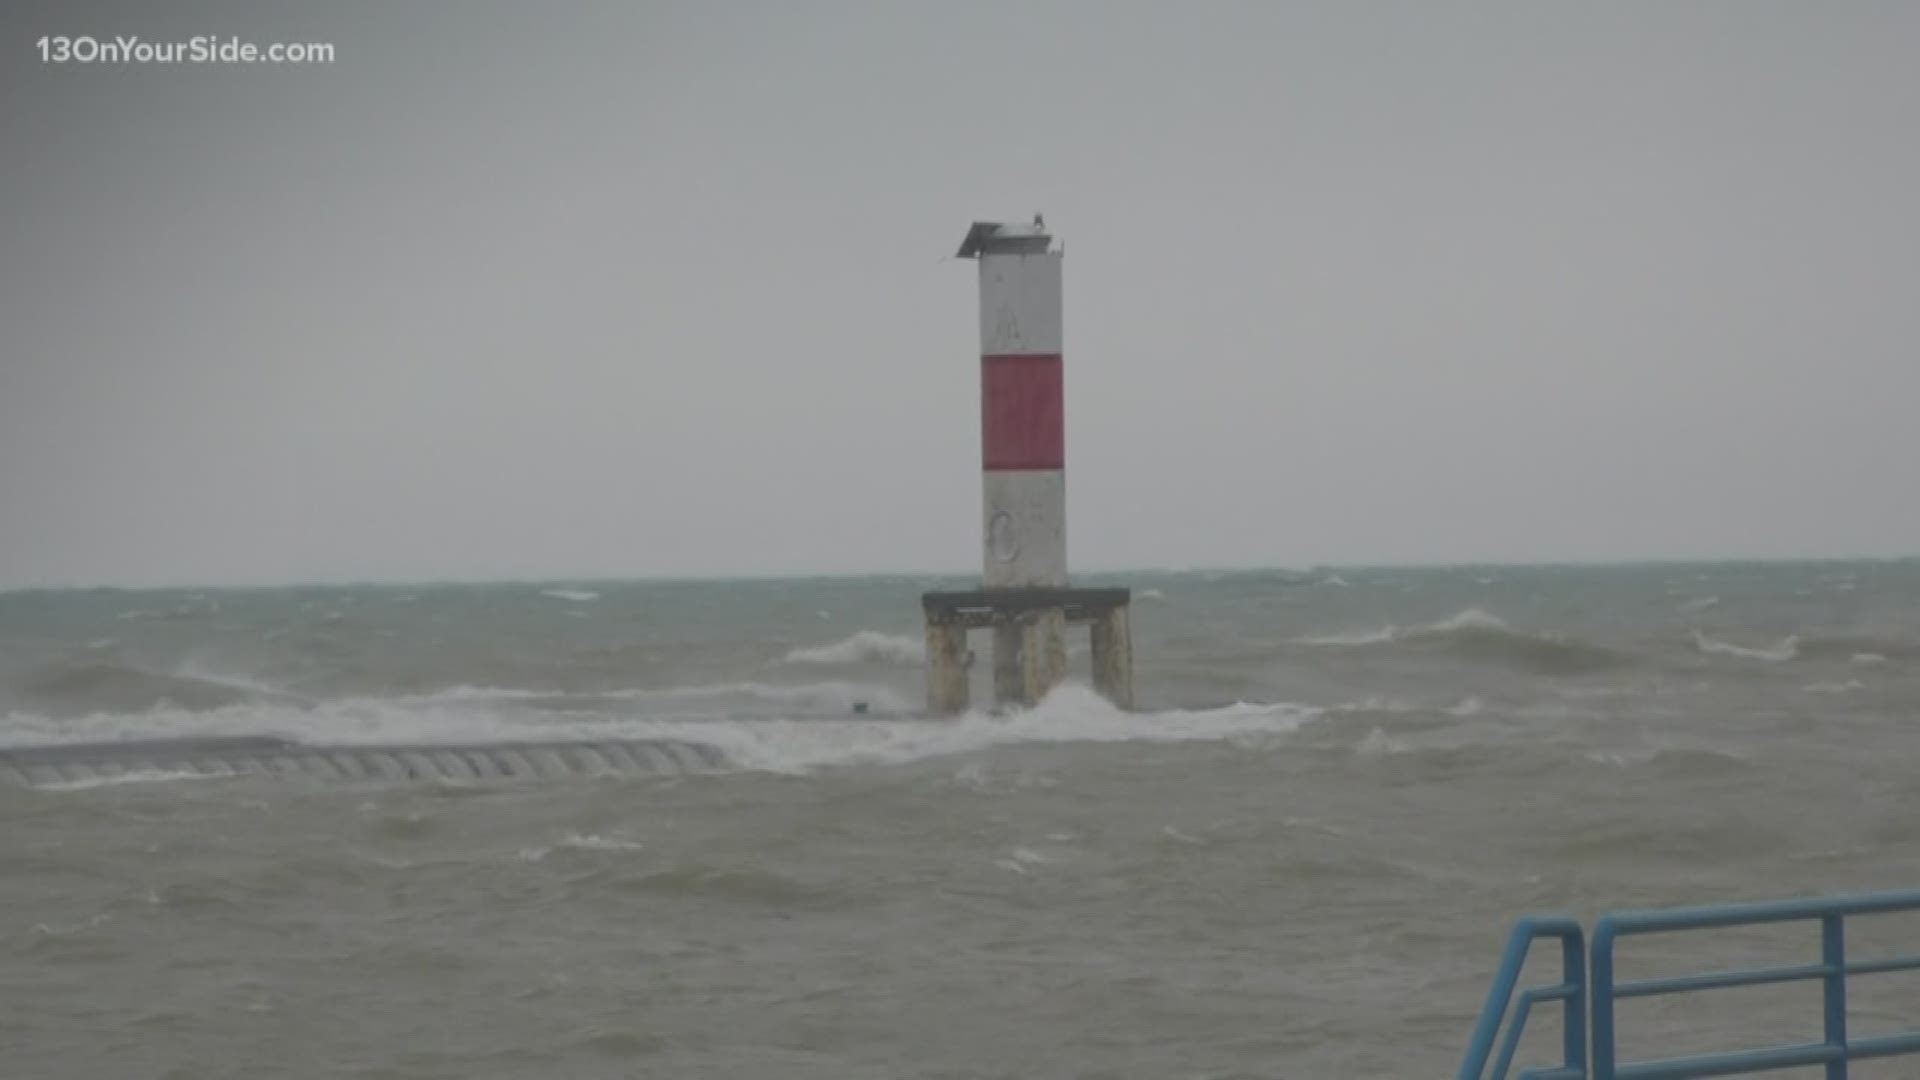 Sunday, crews were unable to look for Eliza Trainer, 16, because of dangerous conditions on Lake Michigan.